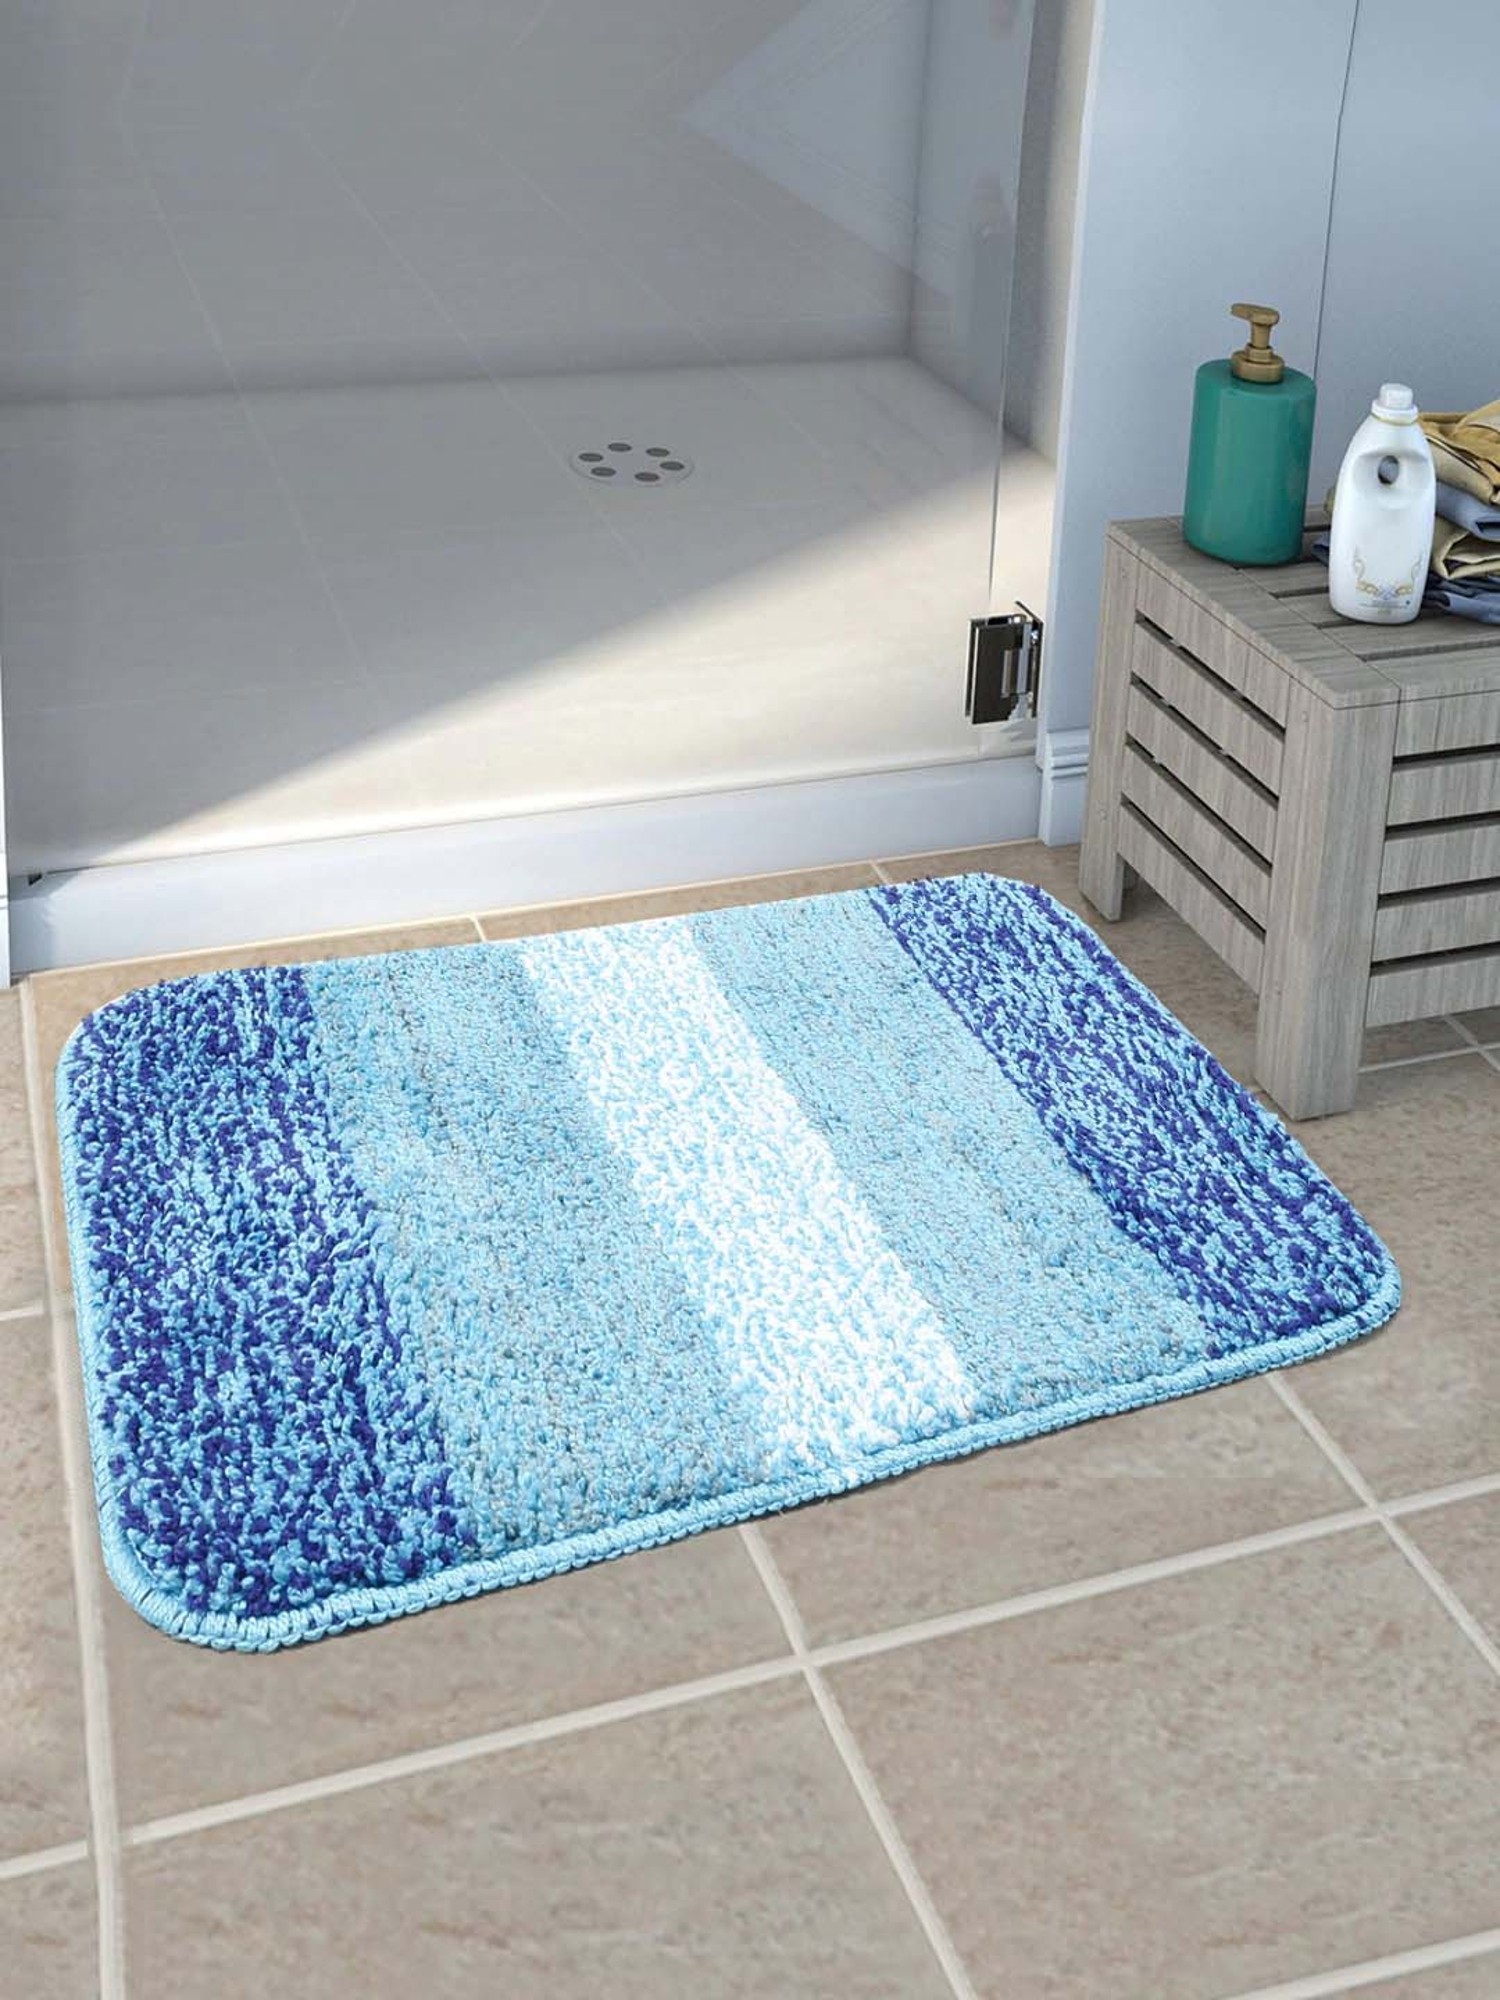 Saral Home Multicolor Polyester 2571 GSM Bath Mats - Set of 2